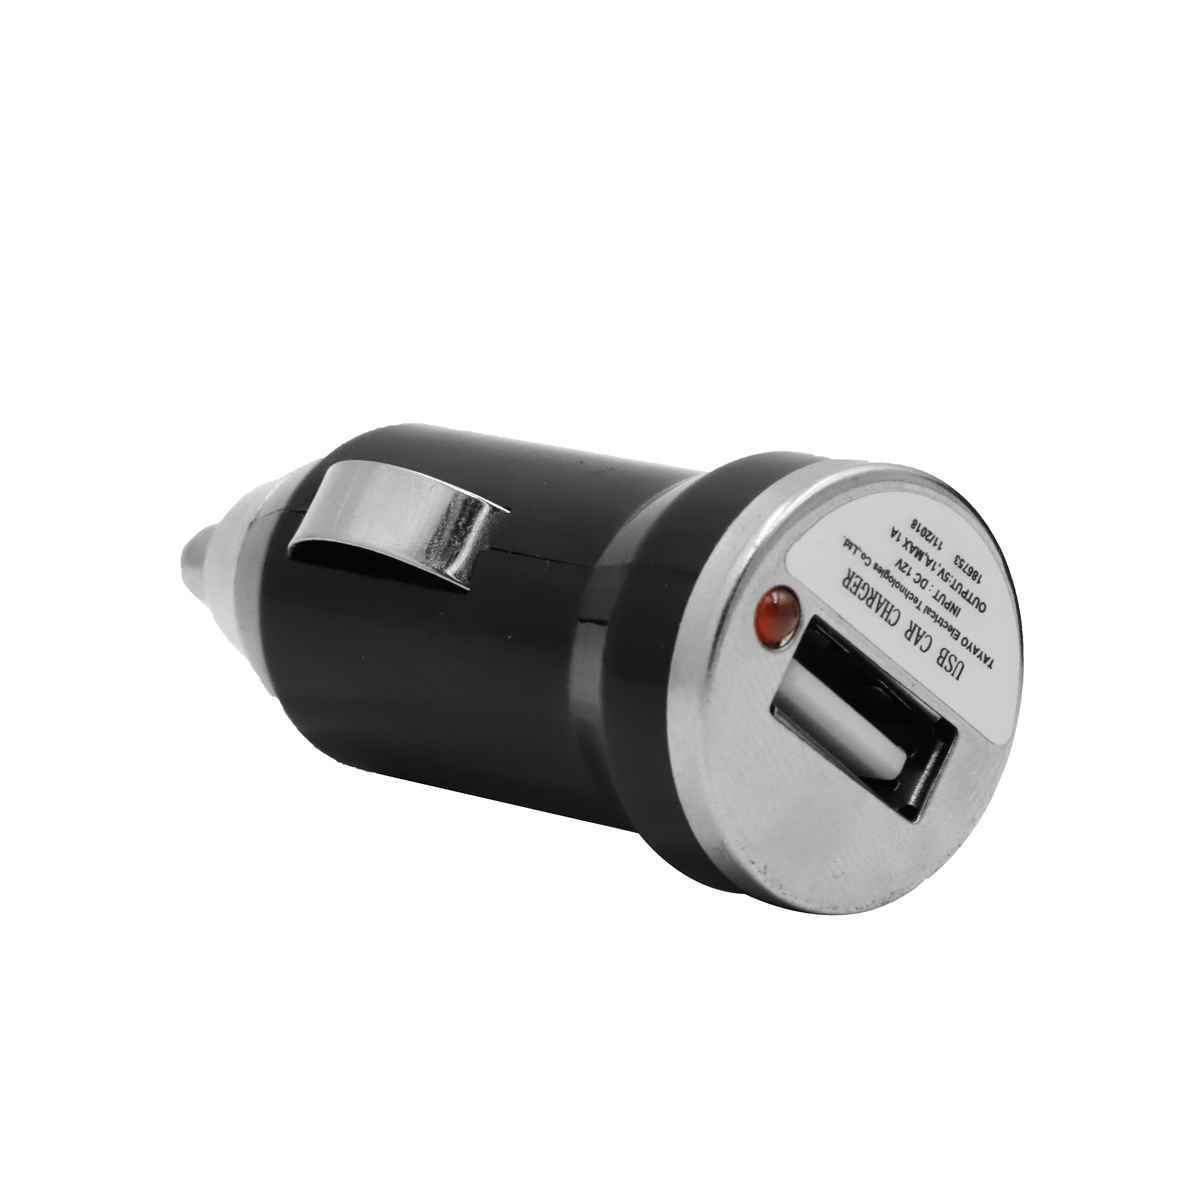 3. LM-3019278 Universal Mobile USB Car Socket Bulk Purchase and Corporate purchase from China Union Power -Description-